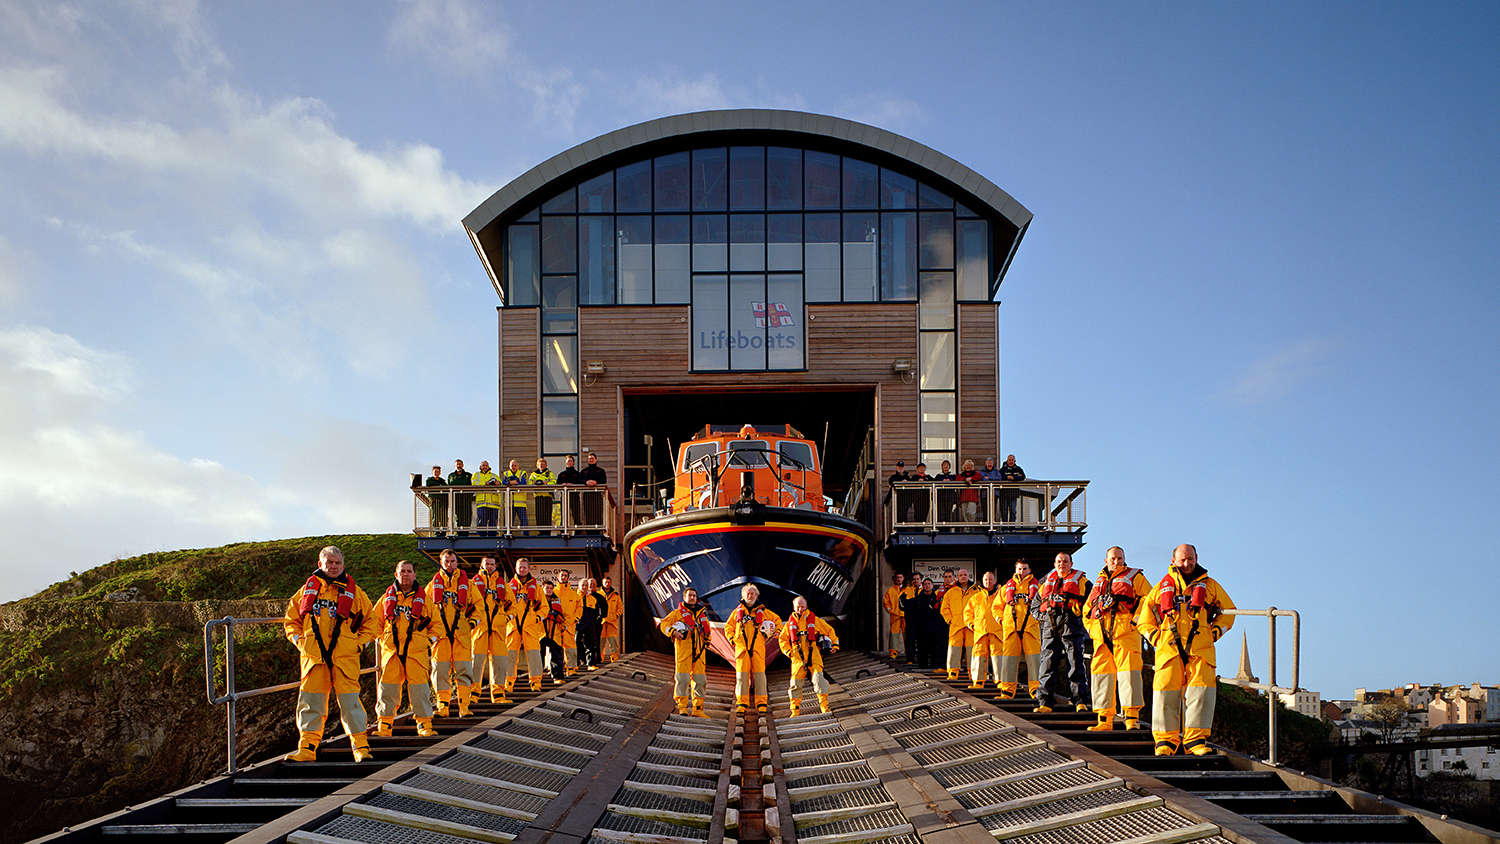 The crew and lifeboat of Tenby Lifeboat Station